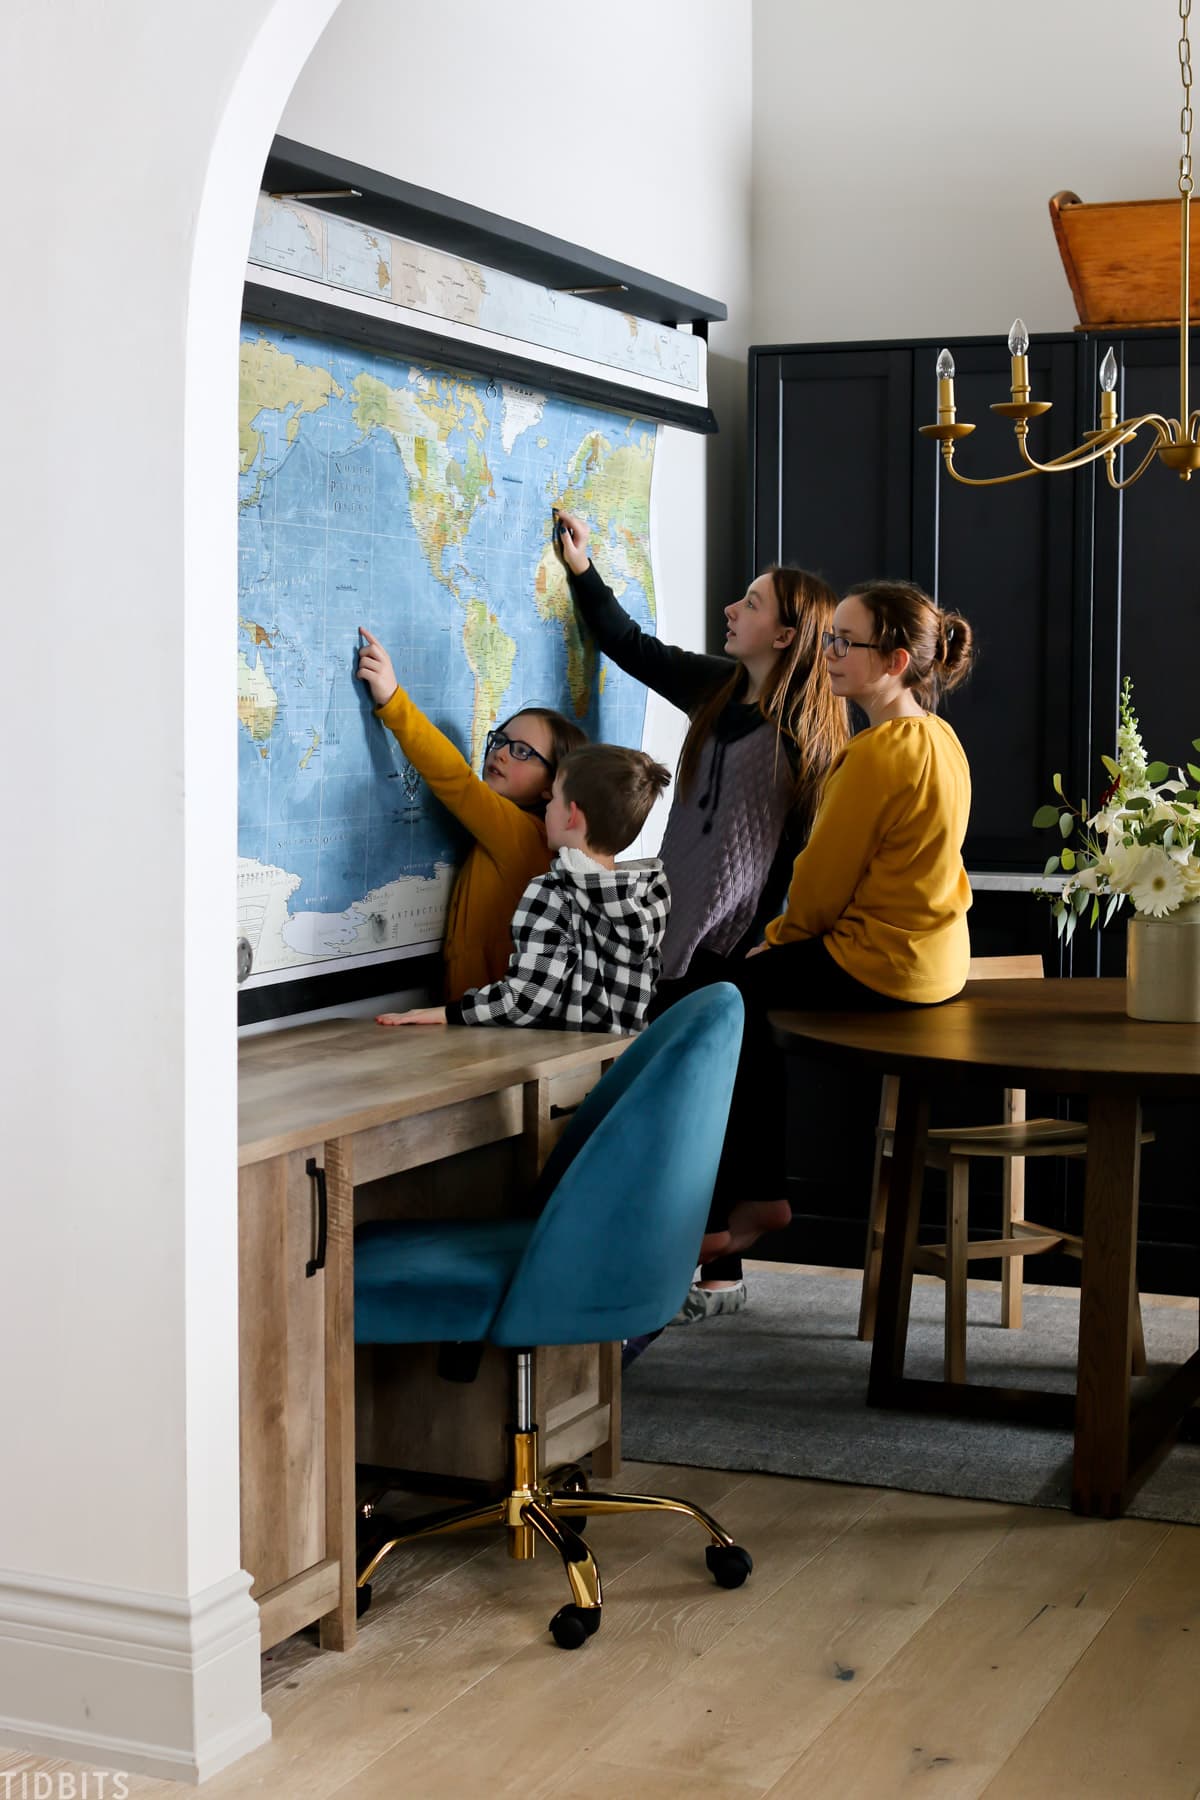 four kids looking at a world map in a converted room used for homeschooling